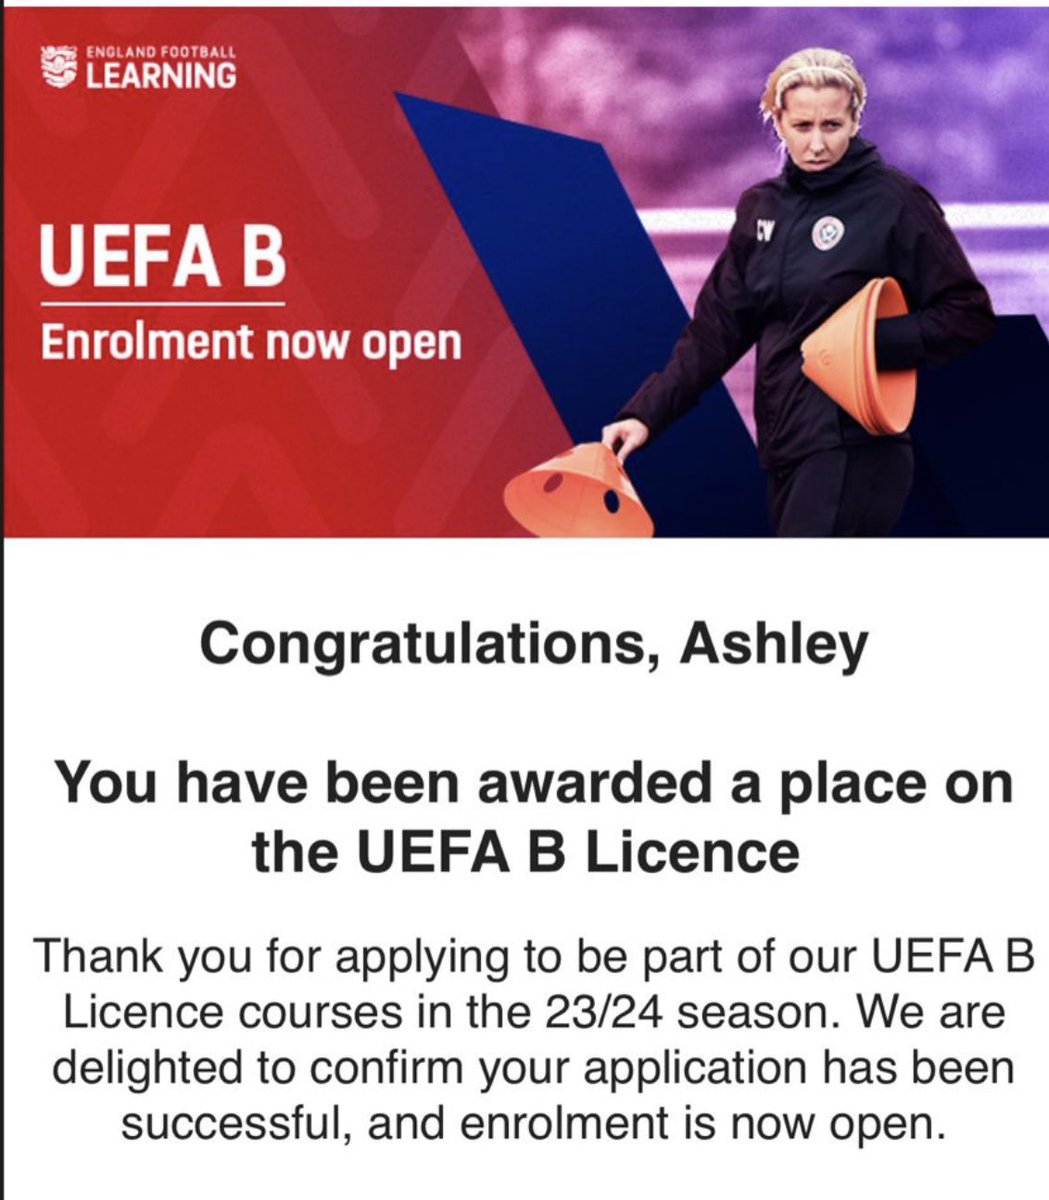 Absolutely delighted to be offered a place on #UEFAB ! Can’t wait to get started in the new year @EnglandLearning